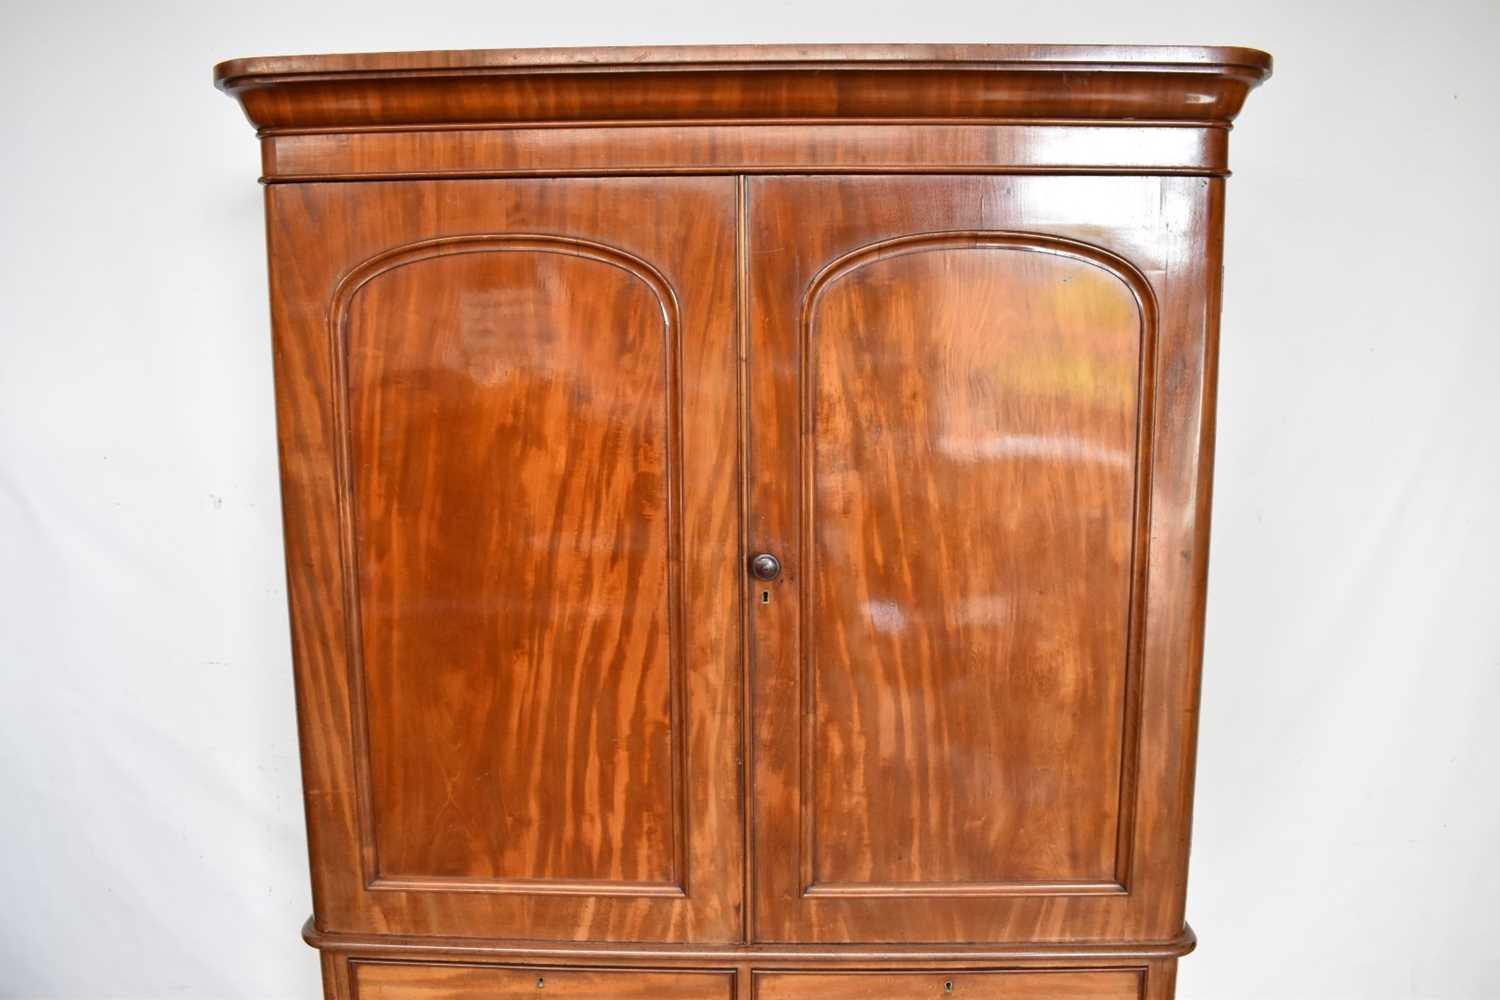 Good quality late Victorian satinwood linen press by Heal & Son - Image 2 of 7